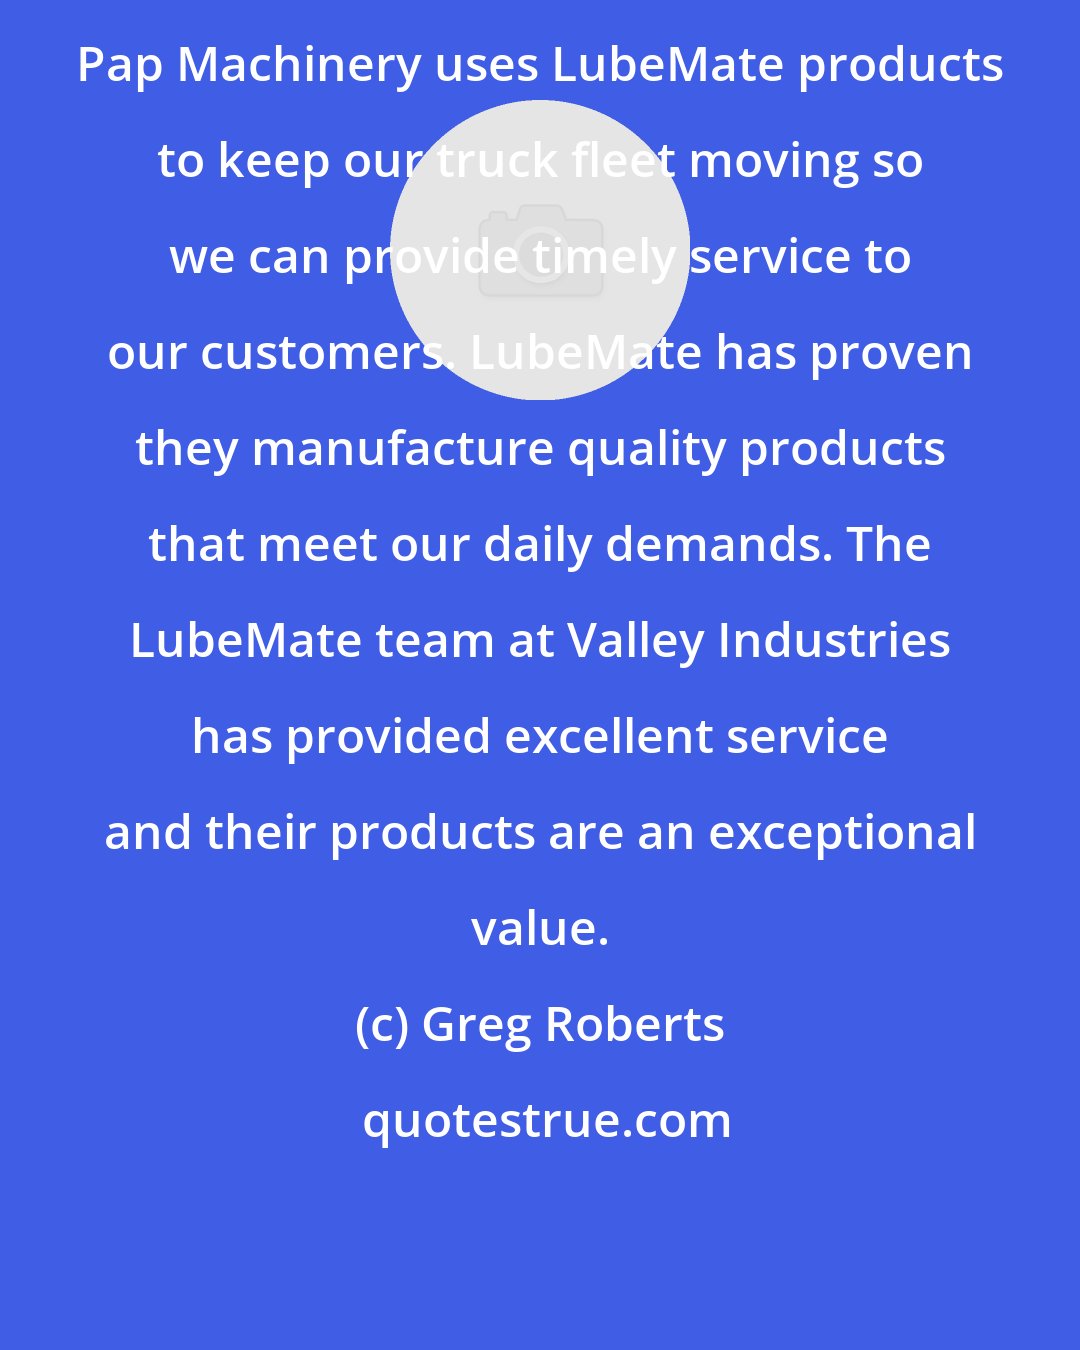 Greg Roberts: Pap Machinery uses LubeMate products to keep our truck fleet moving so we can provide timely service to our customers. LubeMate has proven they manufacture quality products that meet our daily demands. The LubeMate team at Valley Industries has provided excellent service and their products are an exceptional value.